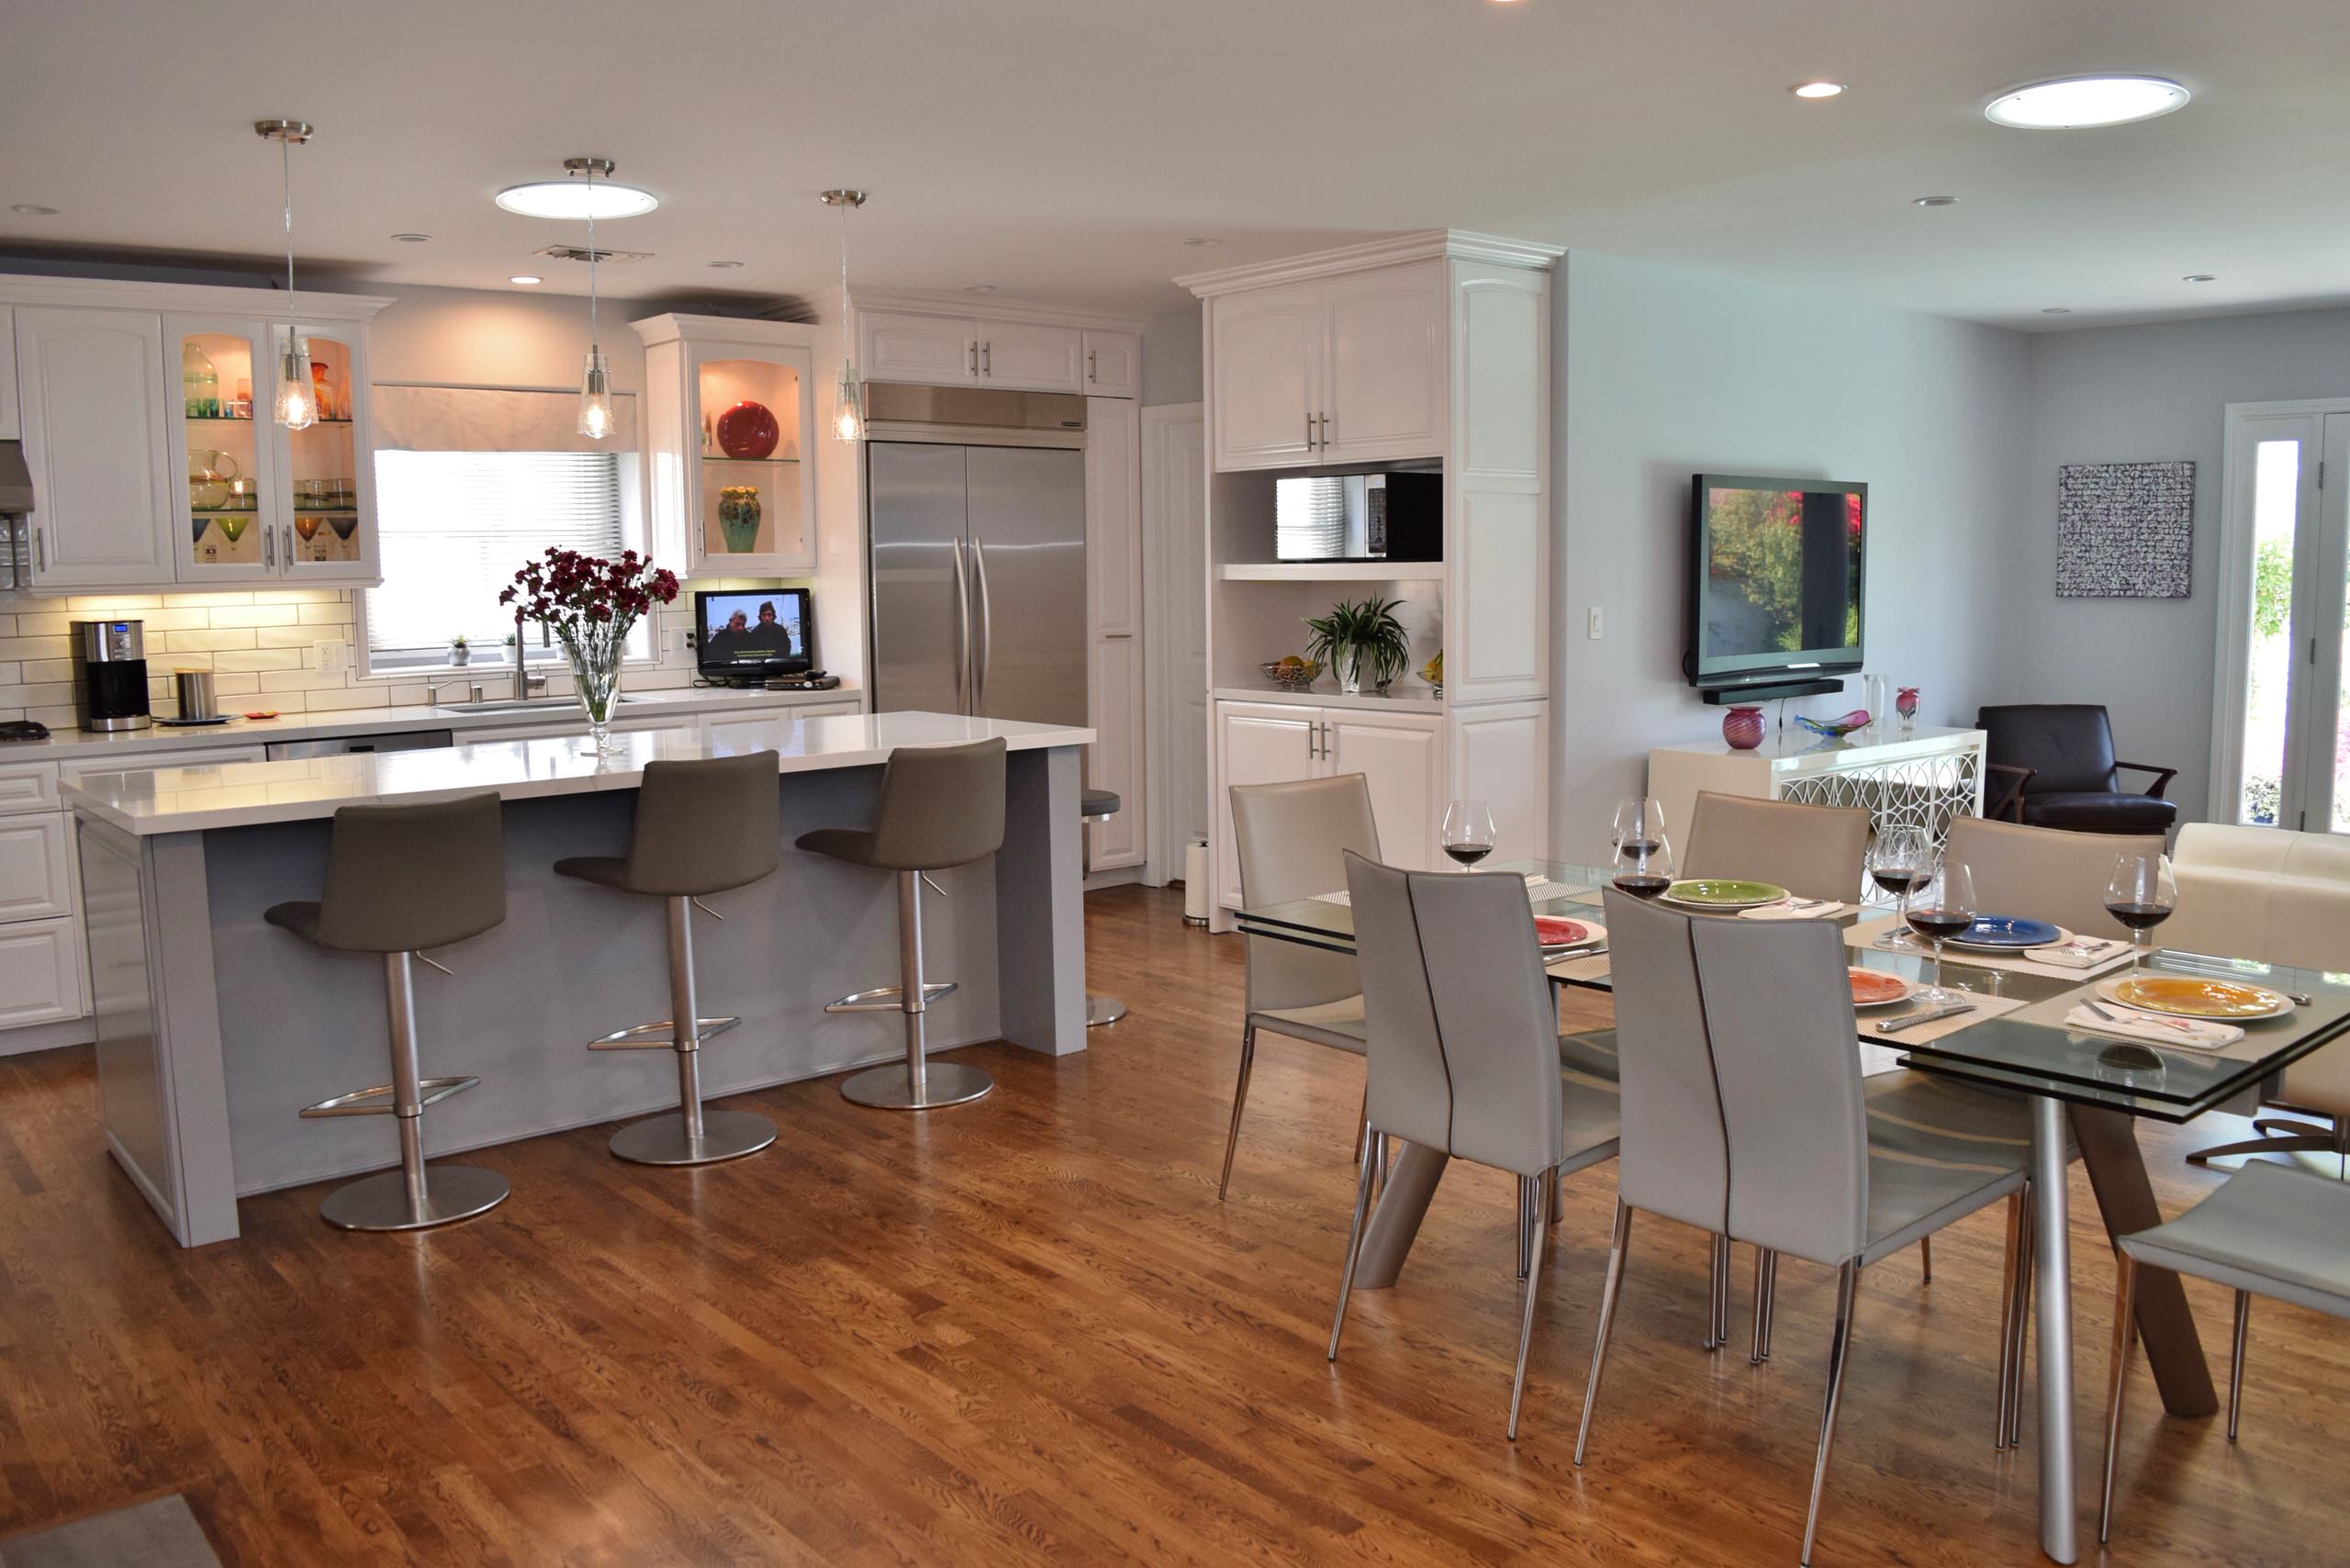 My Kitchen & Contemporary Dining and Living Room Remodel - Sherman Oaks, Ca.